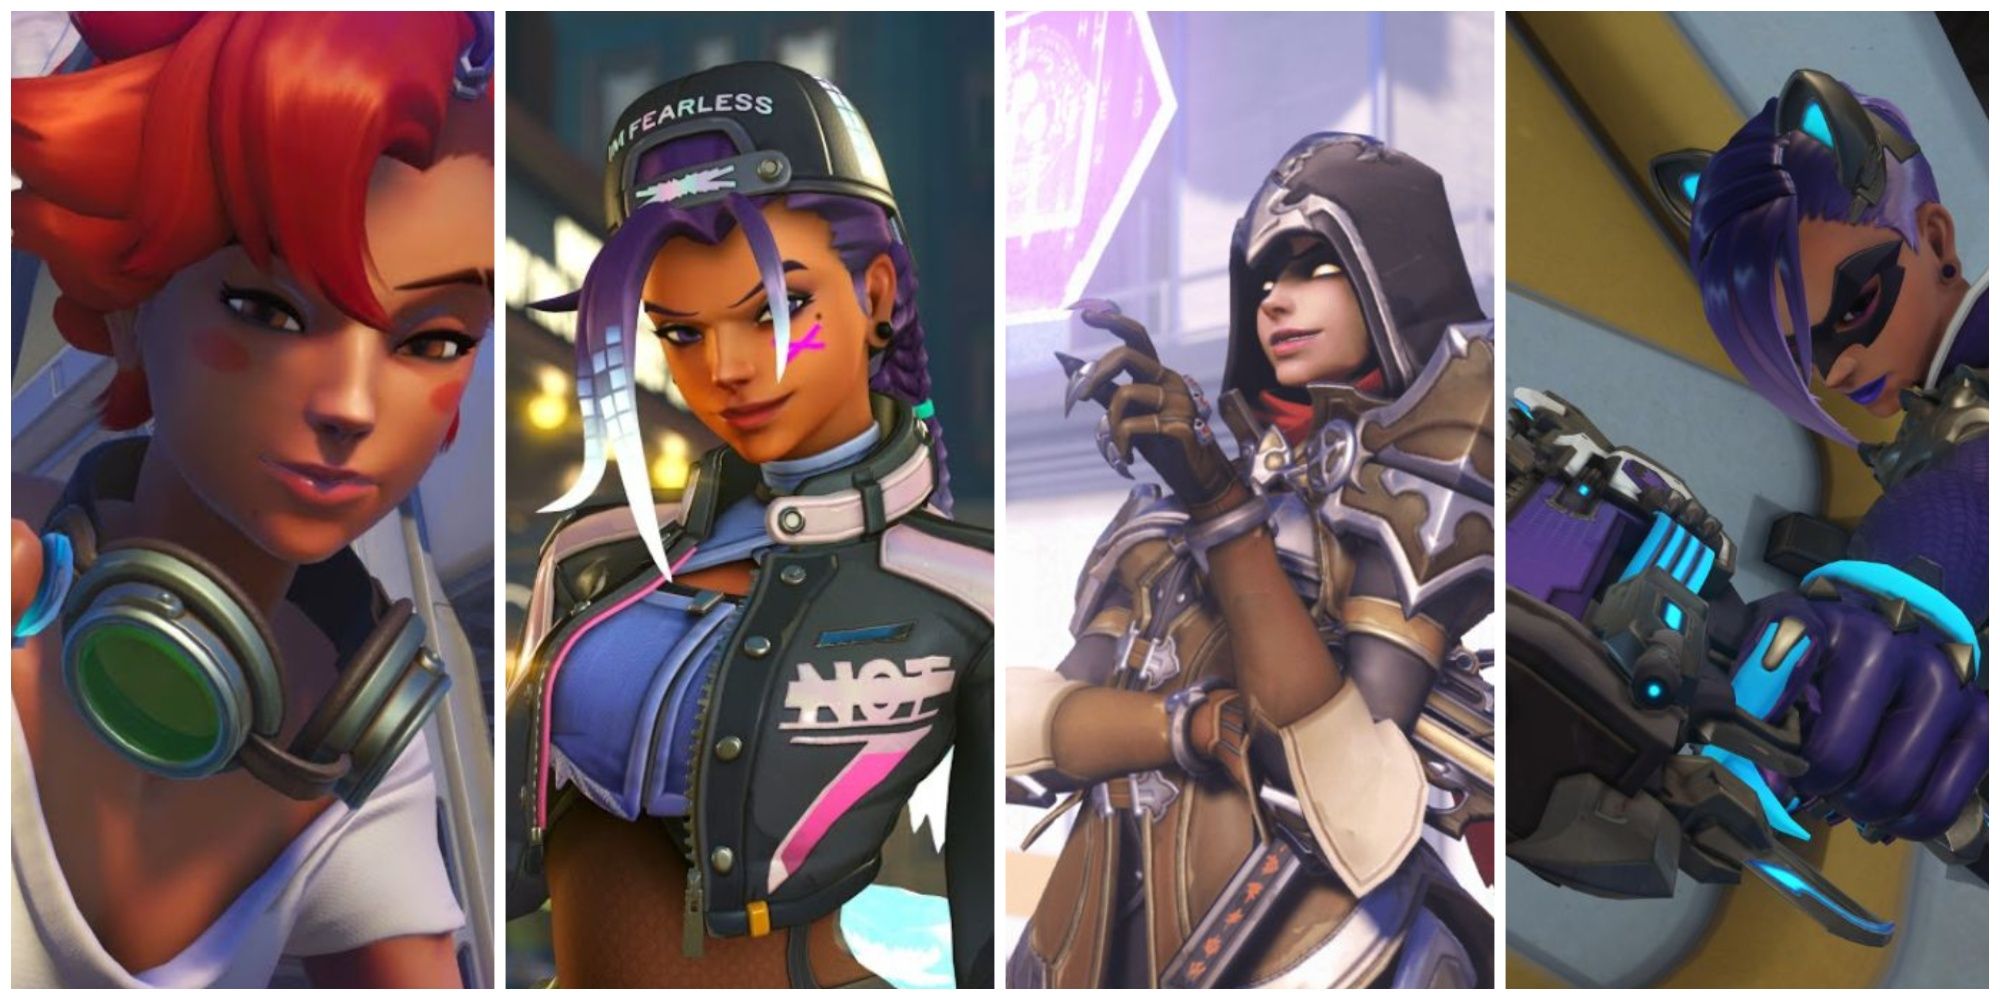 A collage of Sombra from Overwatch 2 wearing different skins